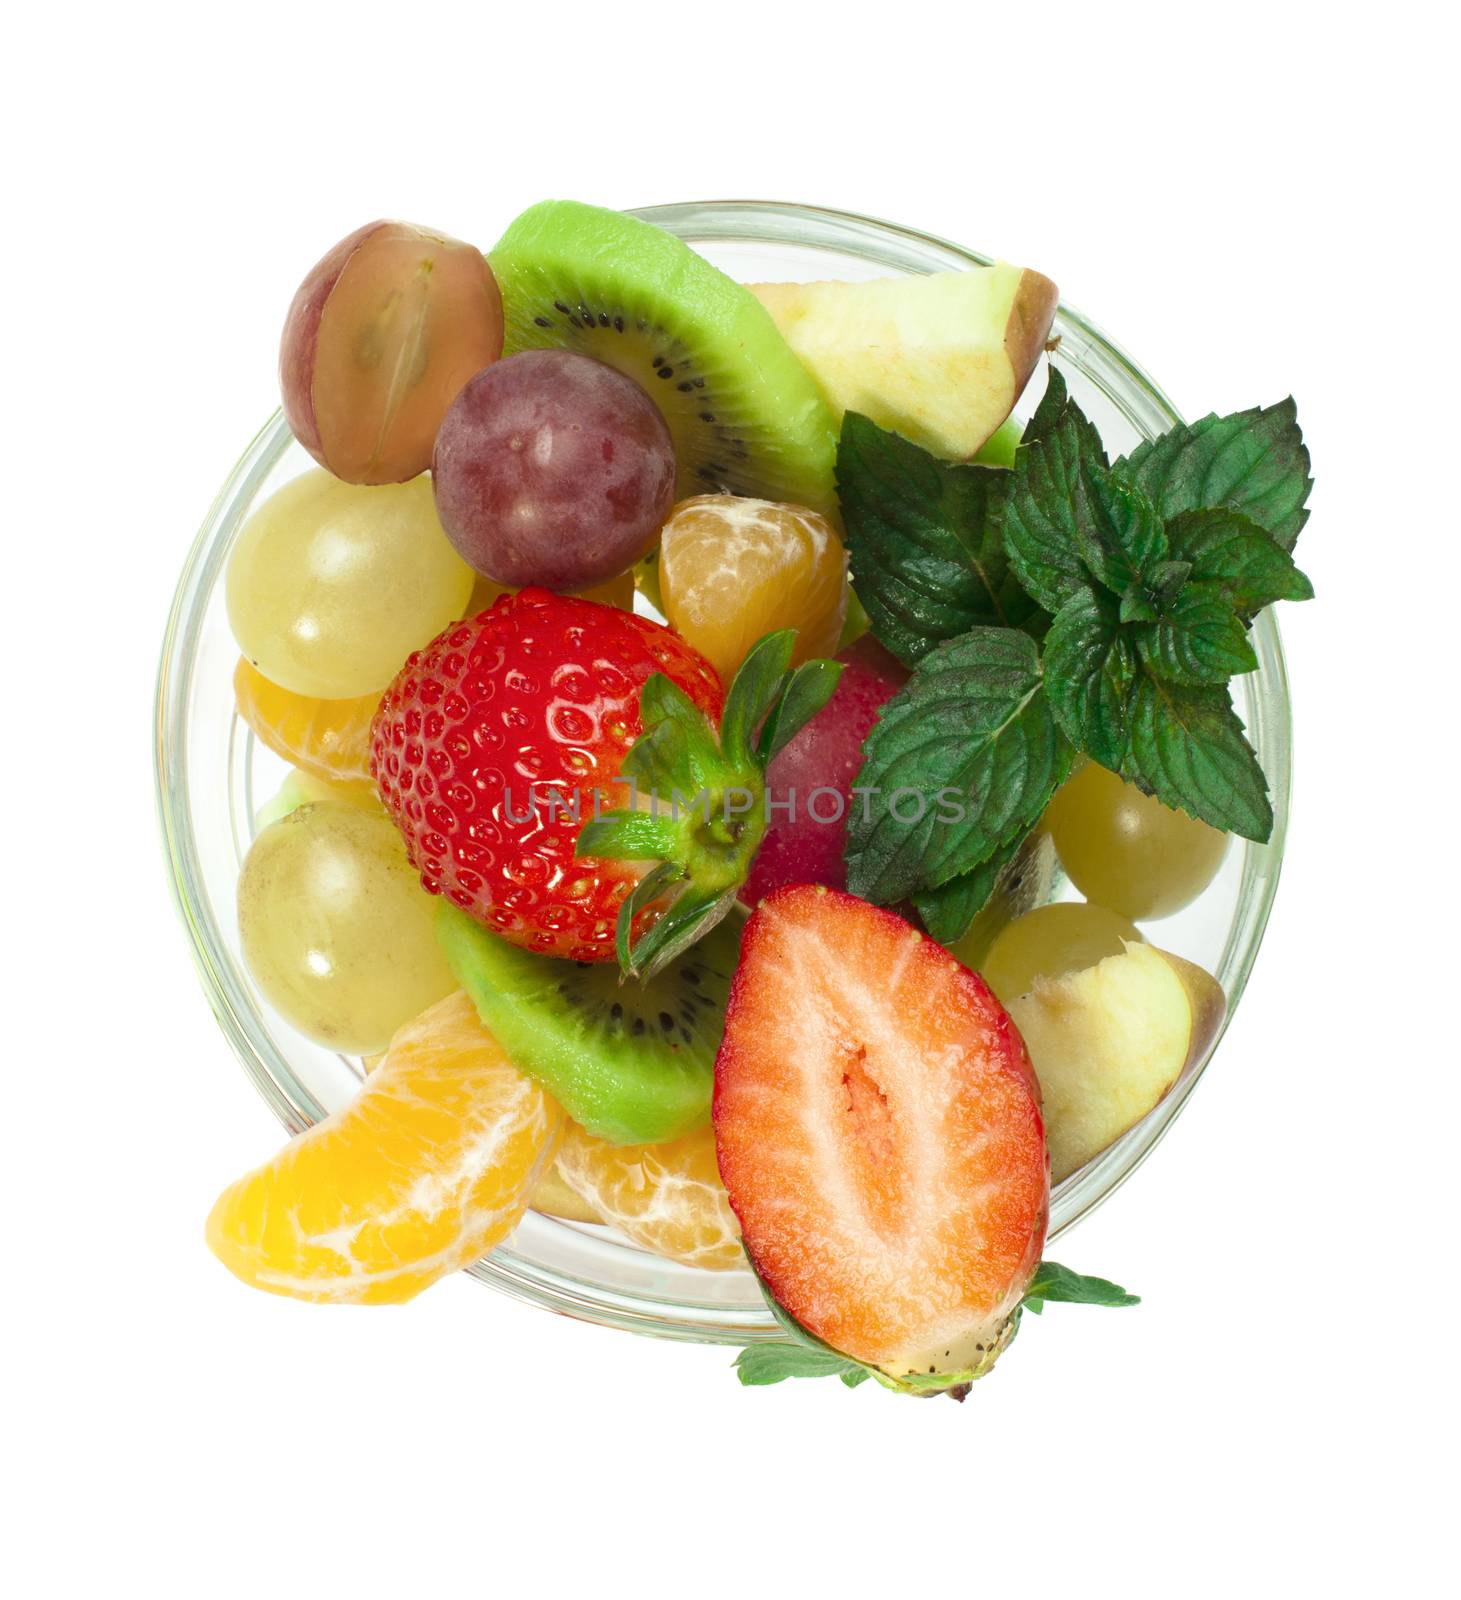 Fruit salad in a glass bowl on white background